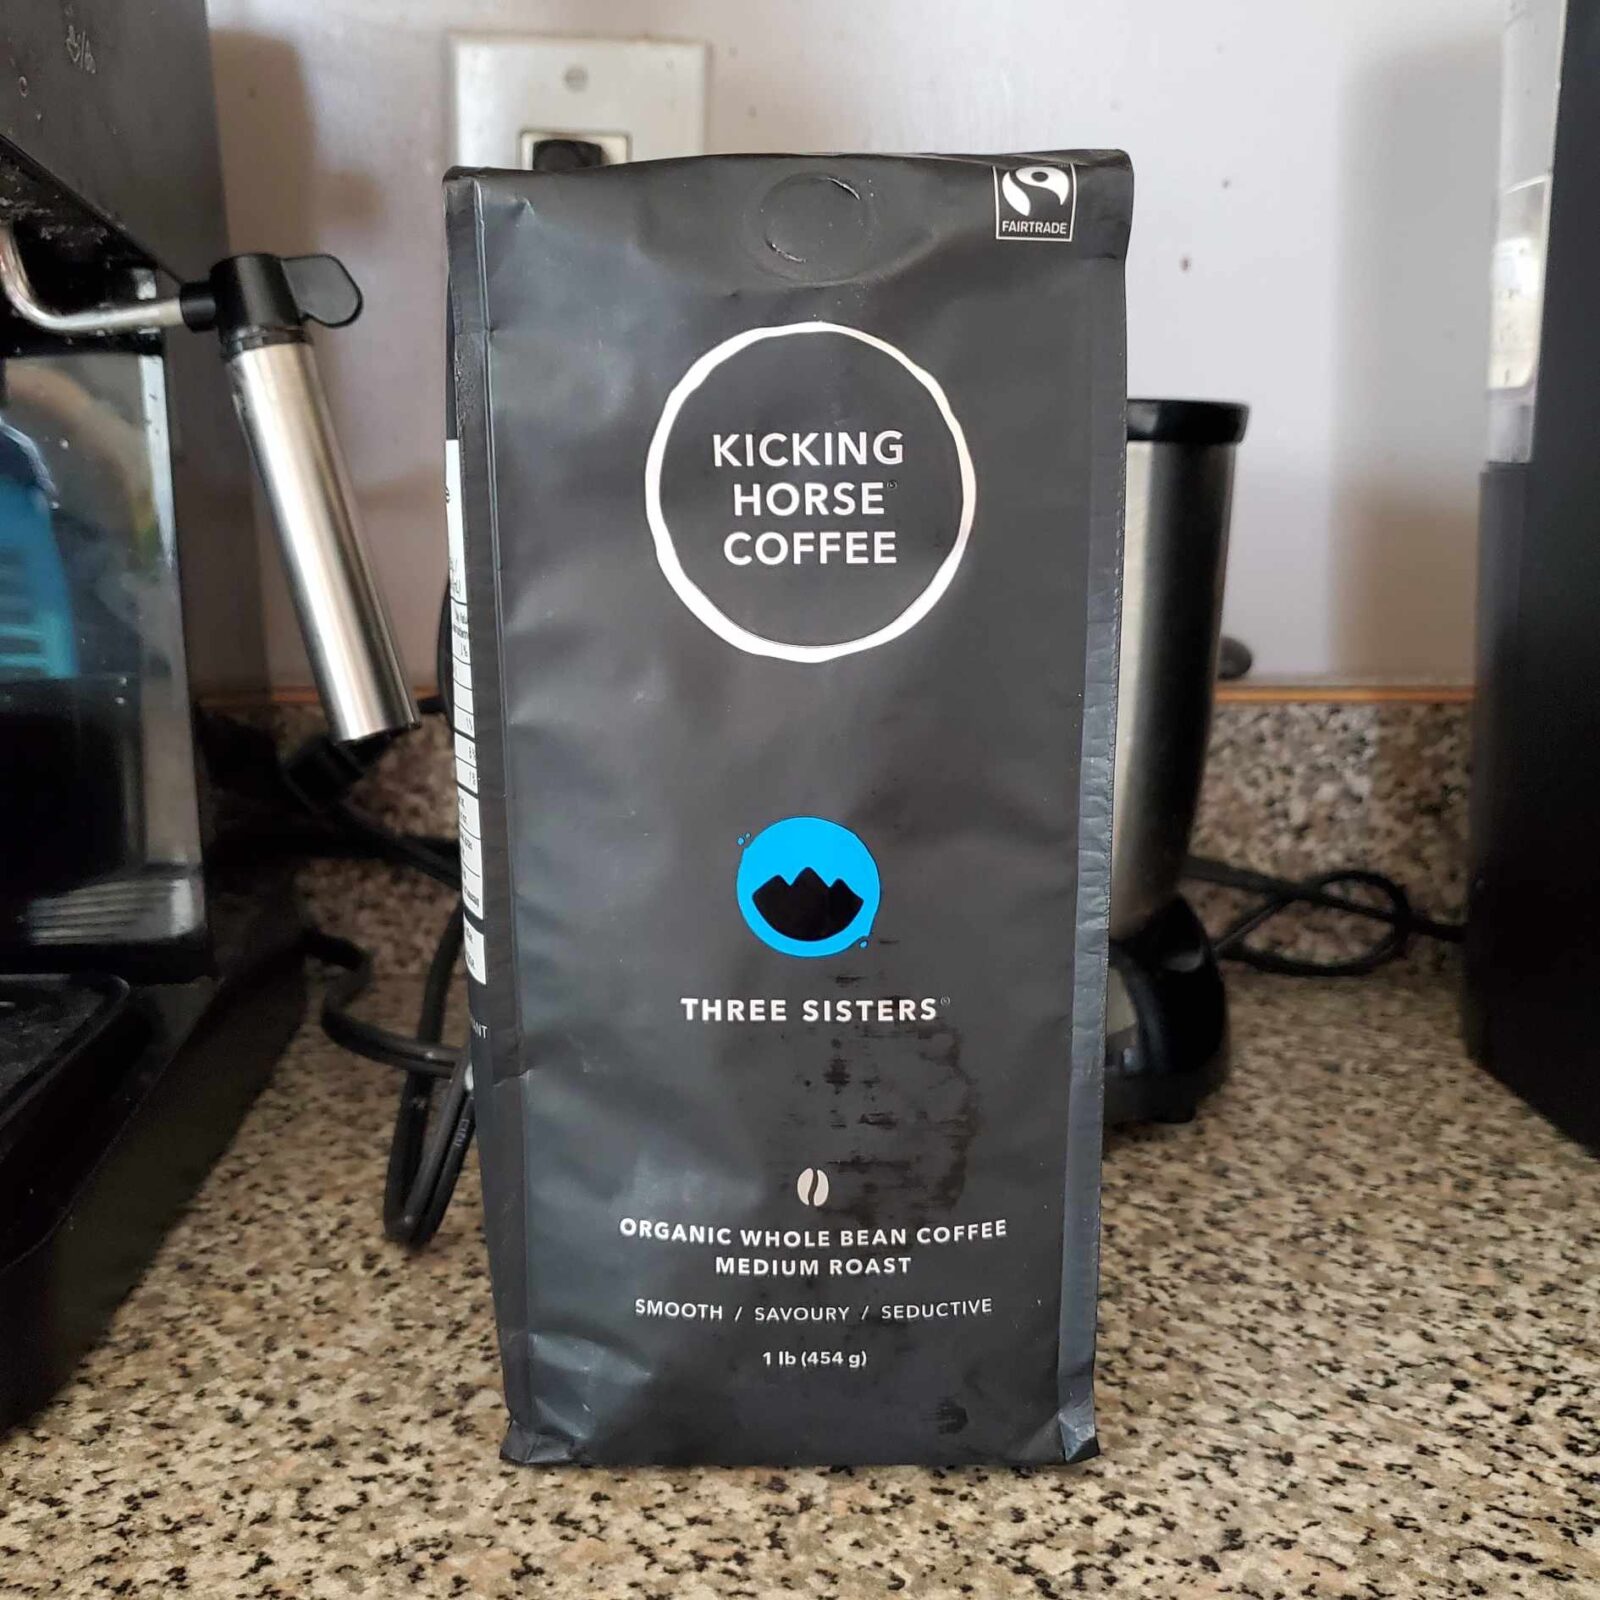 ORGANIC, EXCELLENT, AND ALWAYS DELICIOUS KICKING HORSE COFFEE